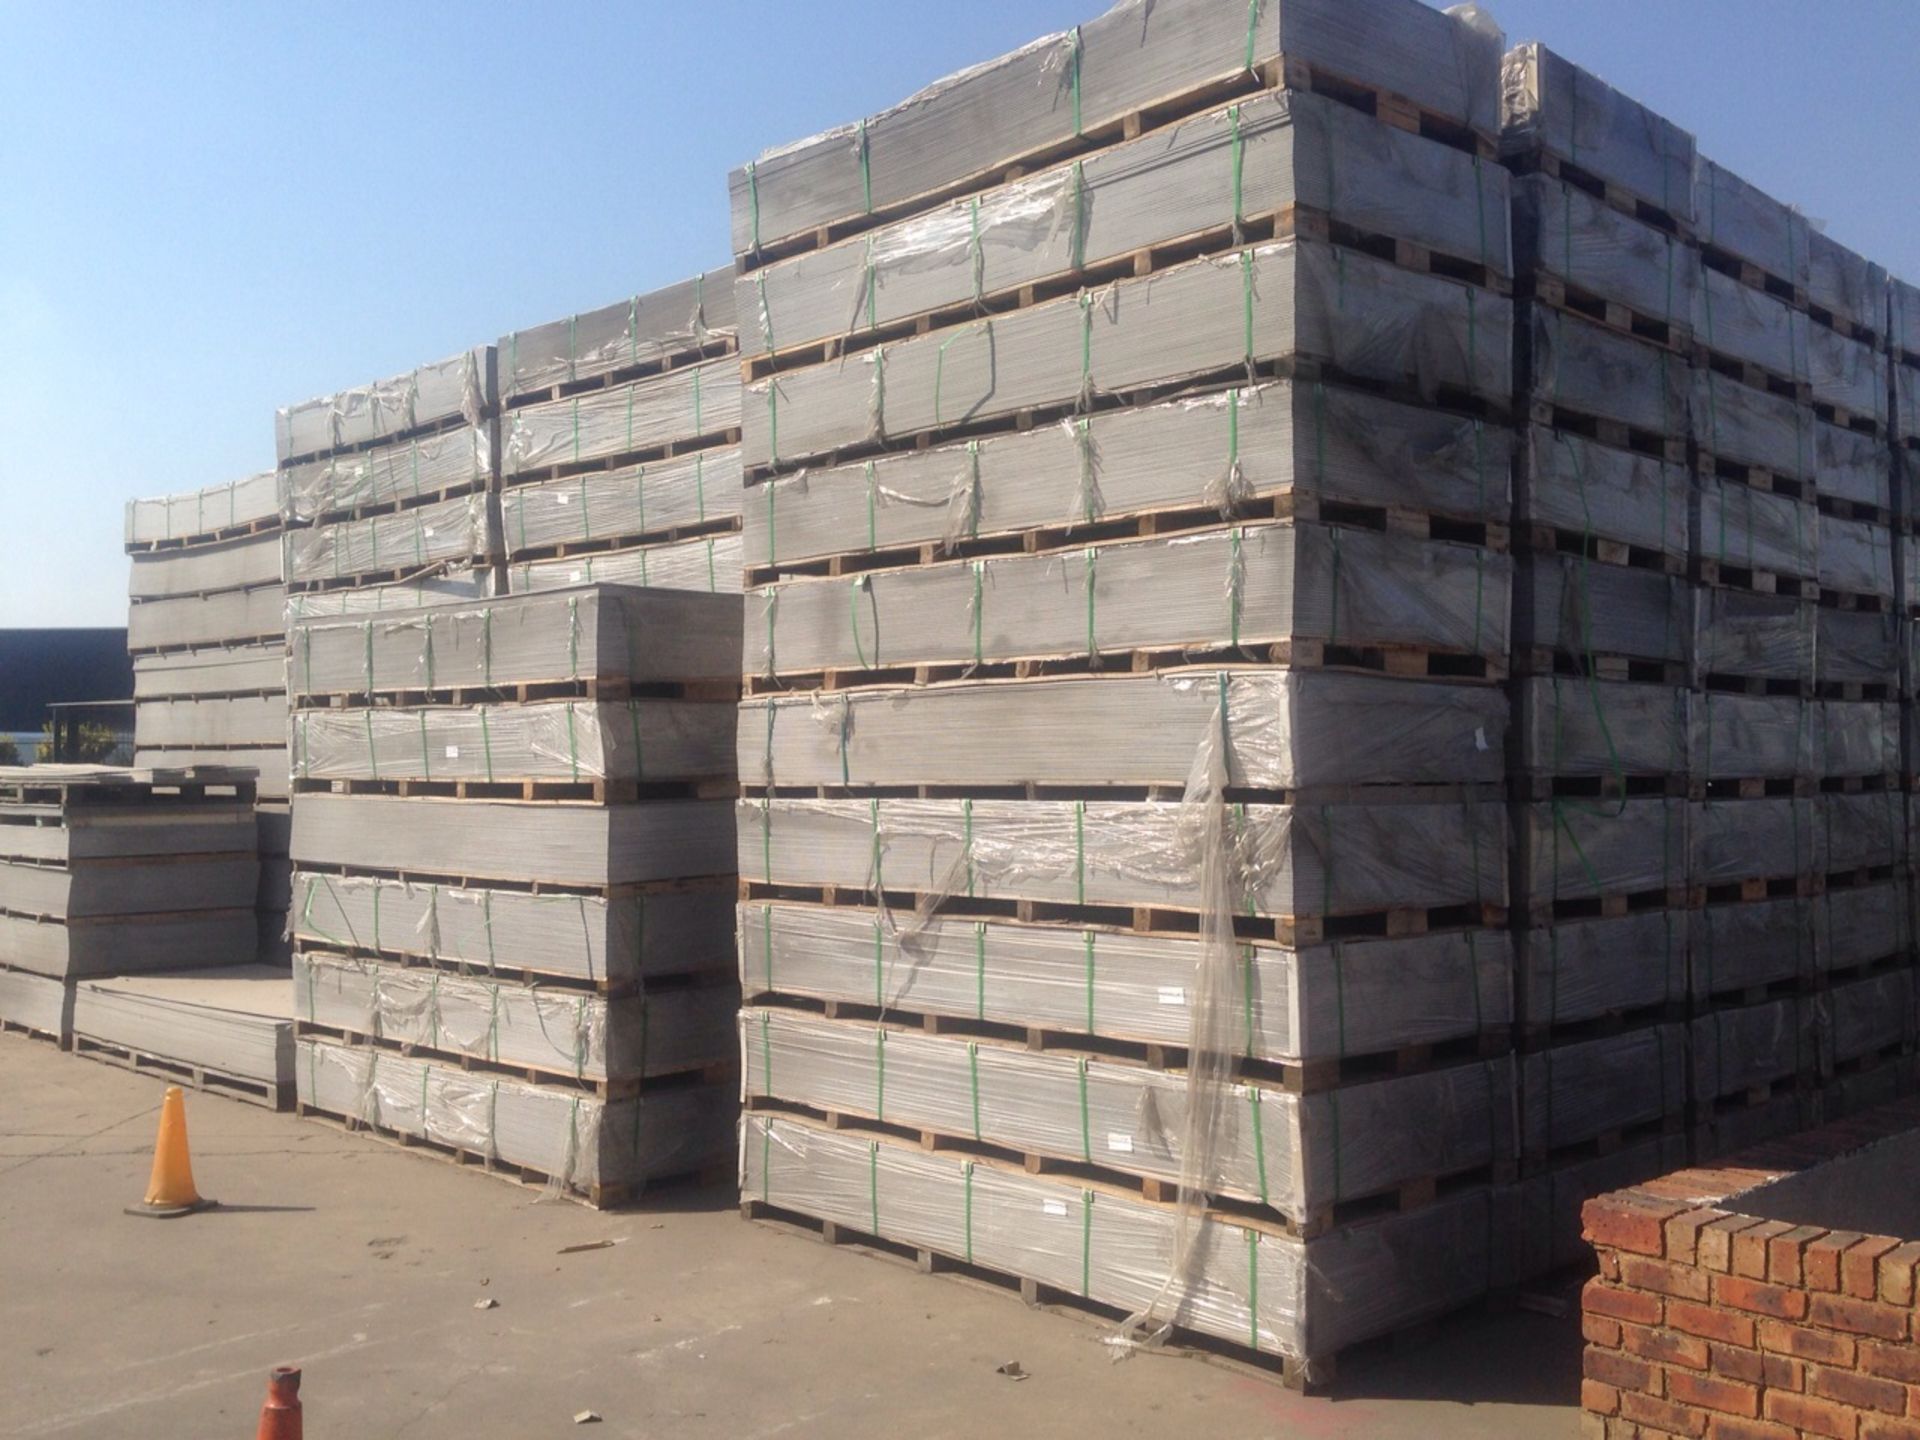 B GRADE FIBRE CEMENT BOARD 9MM TAPERED EDGE 3000 X 1200 (10 PALLETS - 35 BOARDS / PALLET) - Image 2 of 3